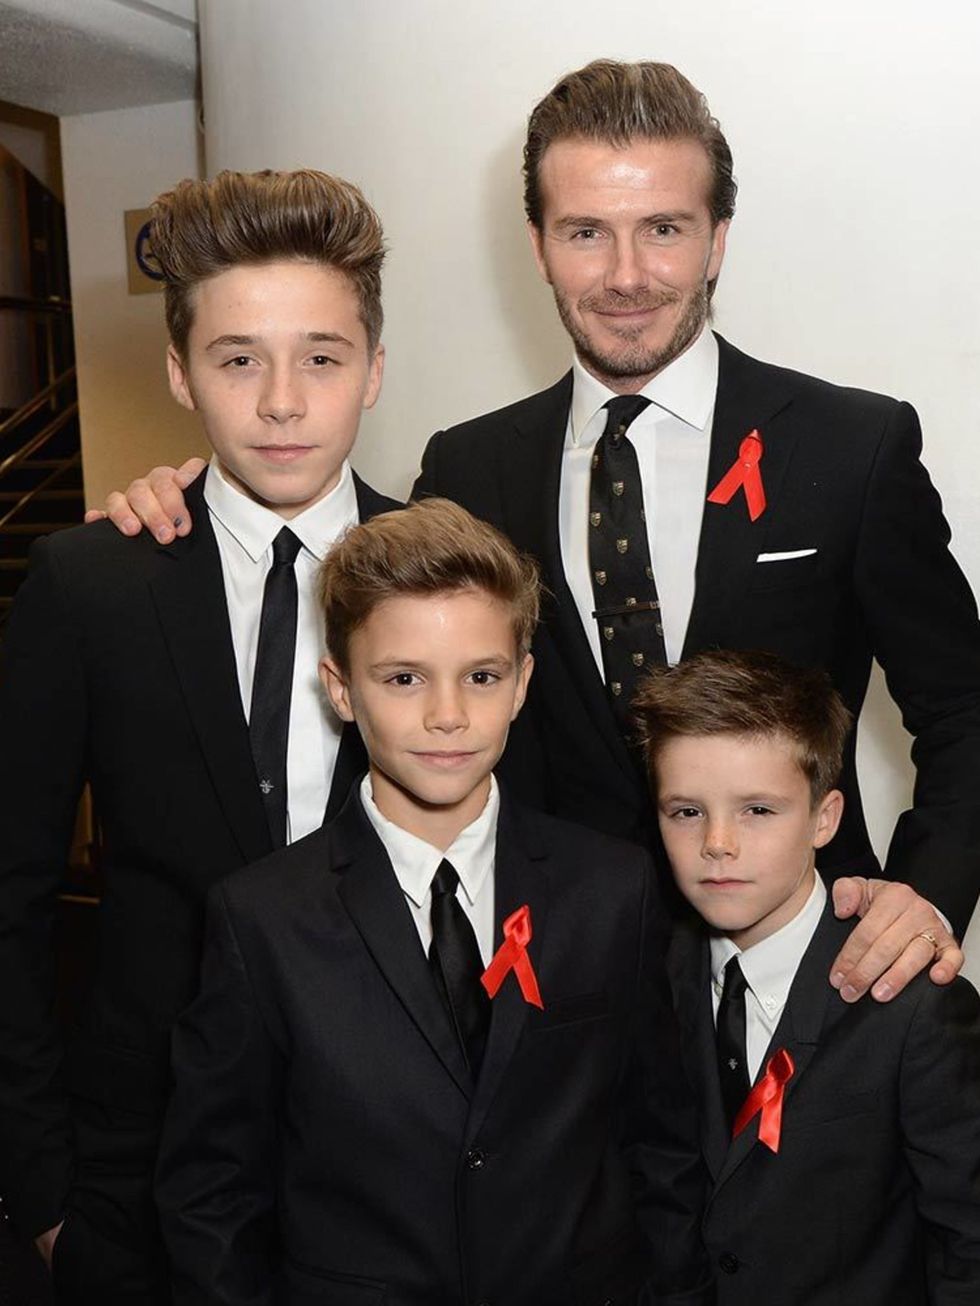 Brooklyn with his brothers and dad, David, at The Class of '92 film premiere 2013